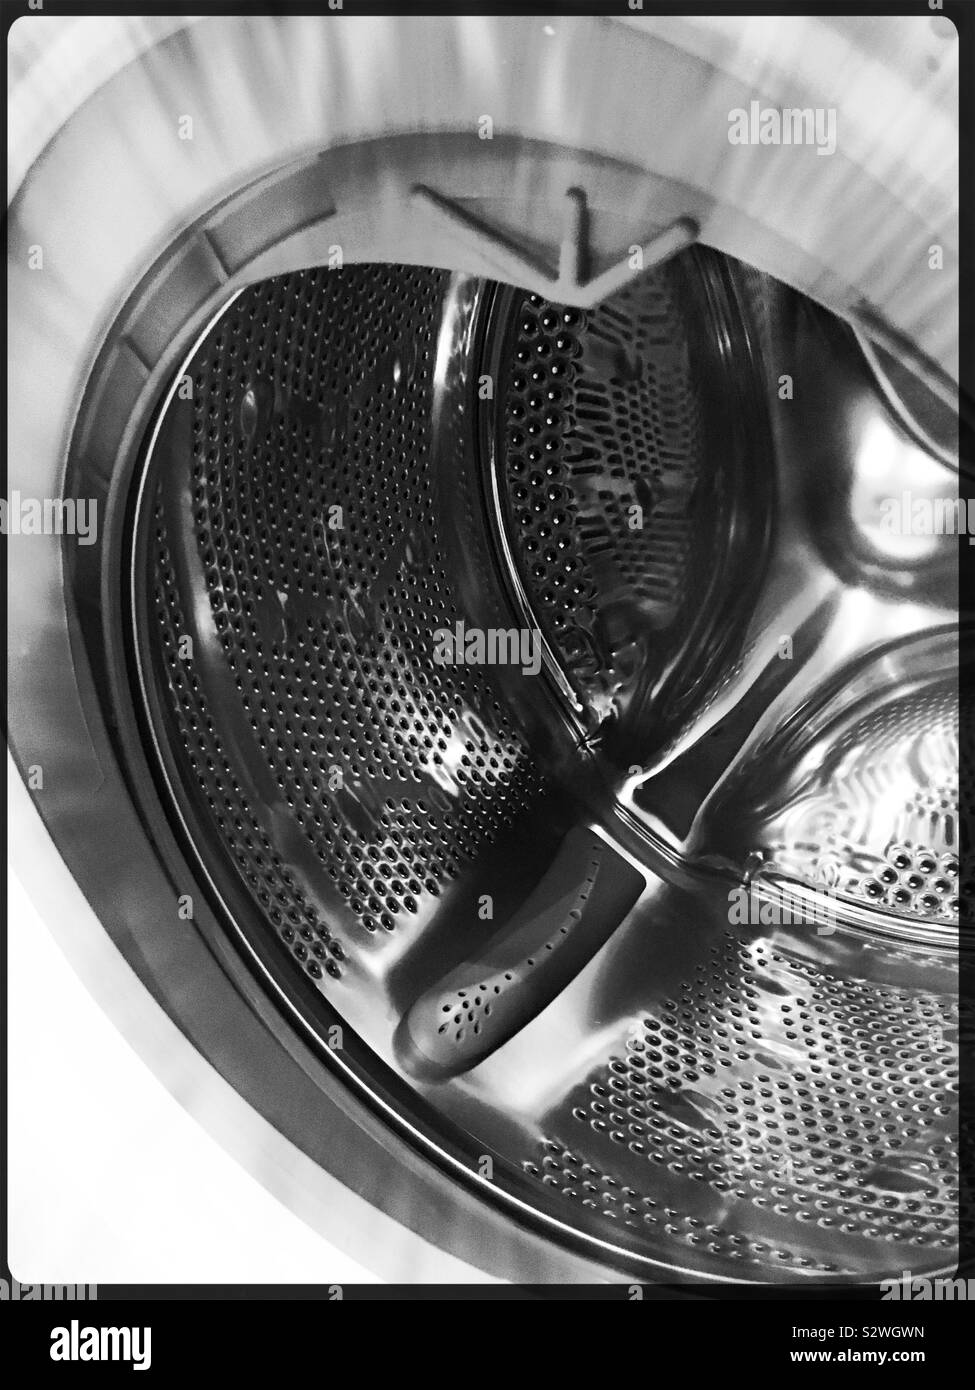 Shiny metal inside the drum of a washing machine Stock Photo